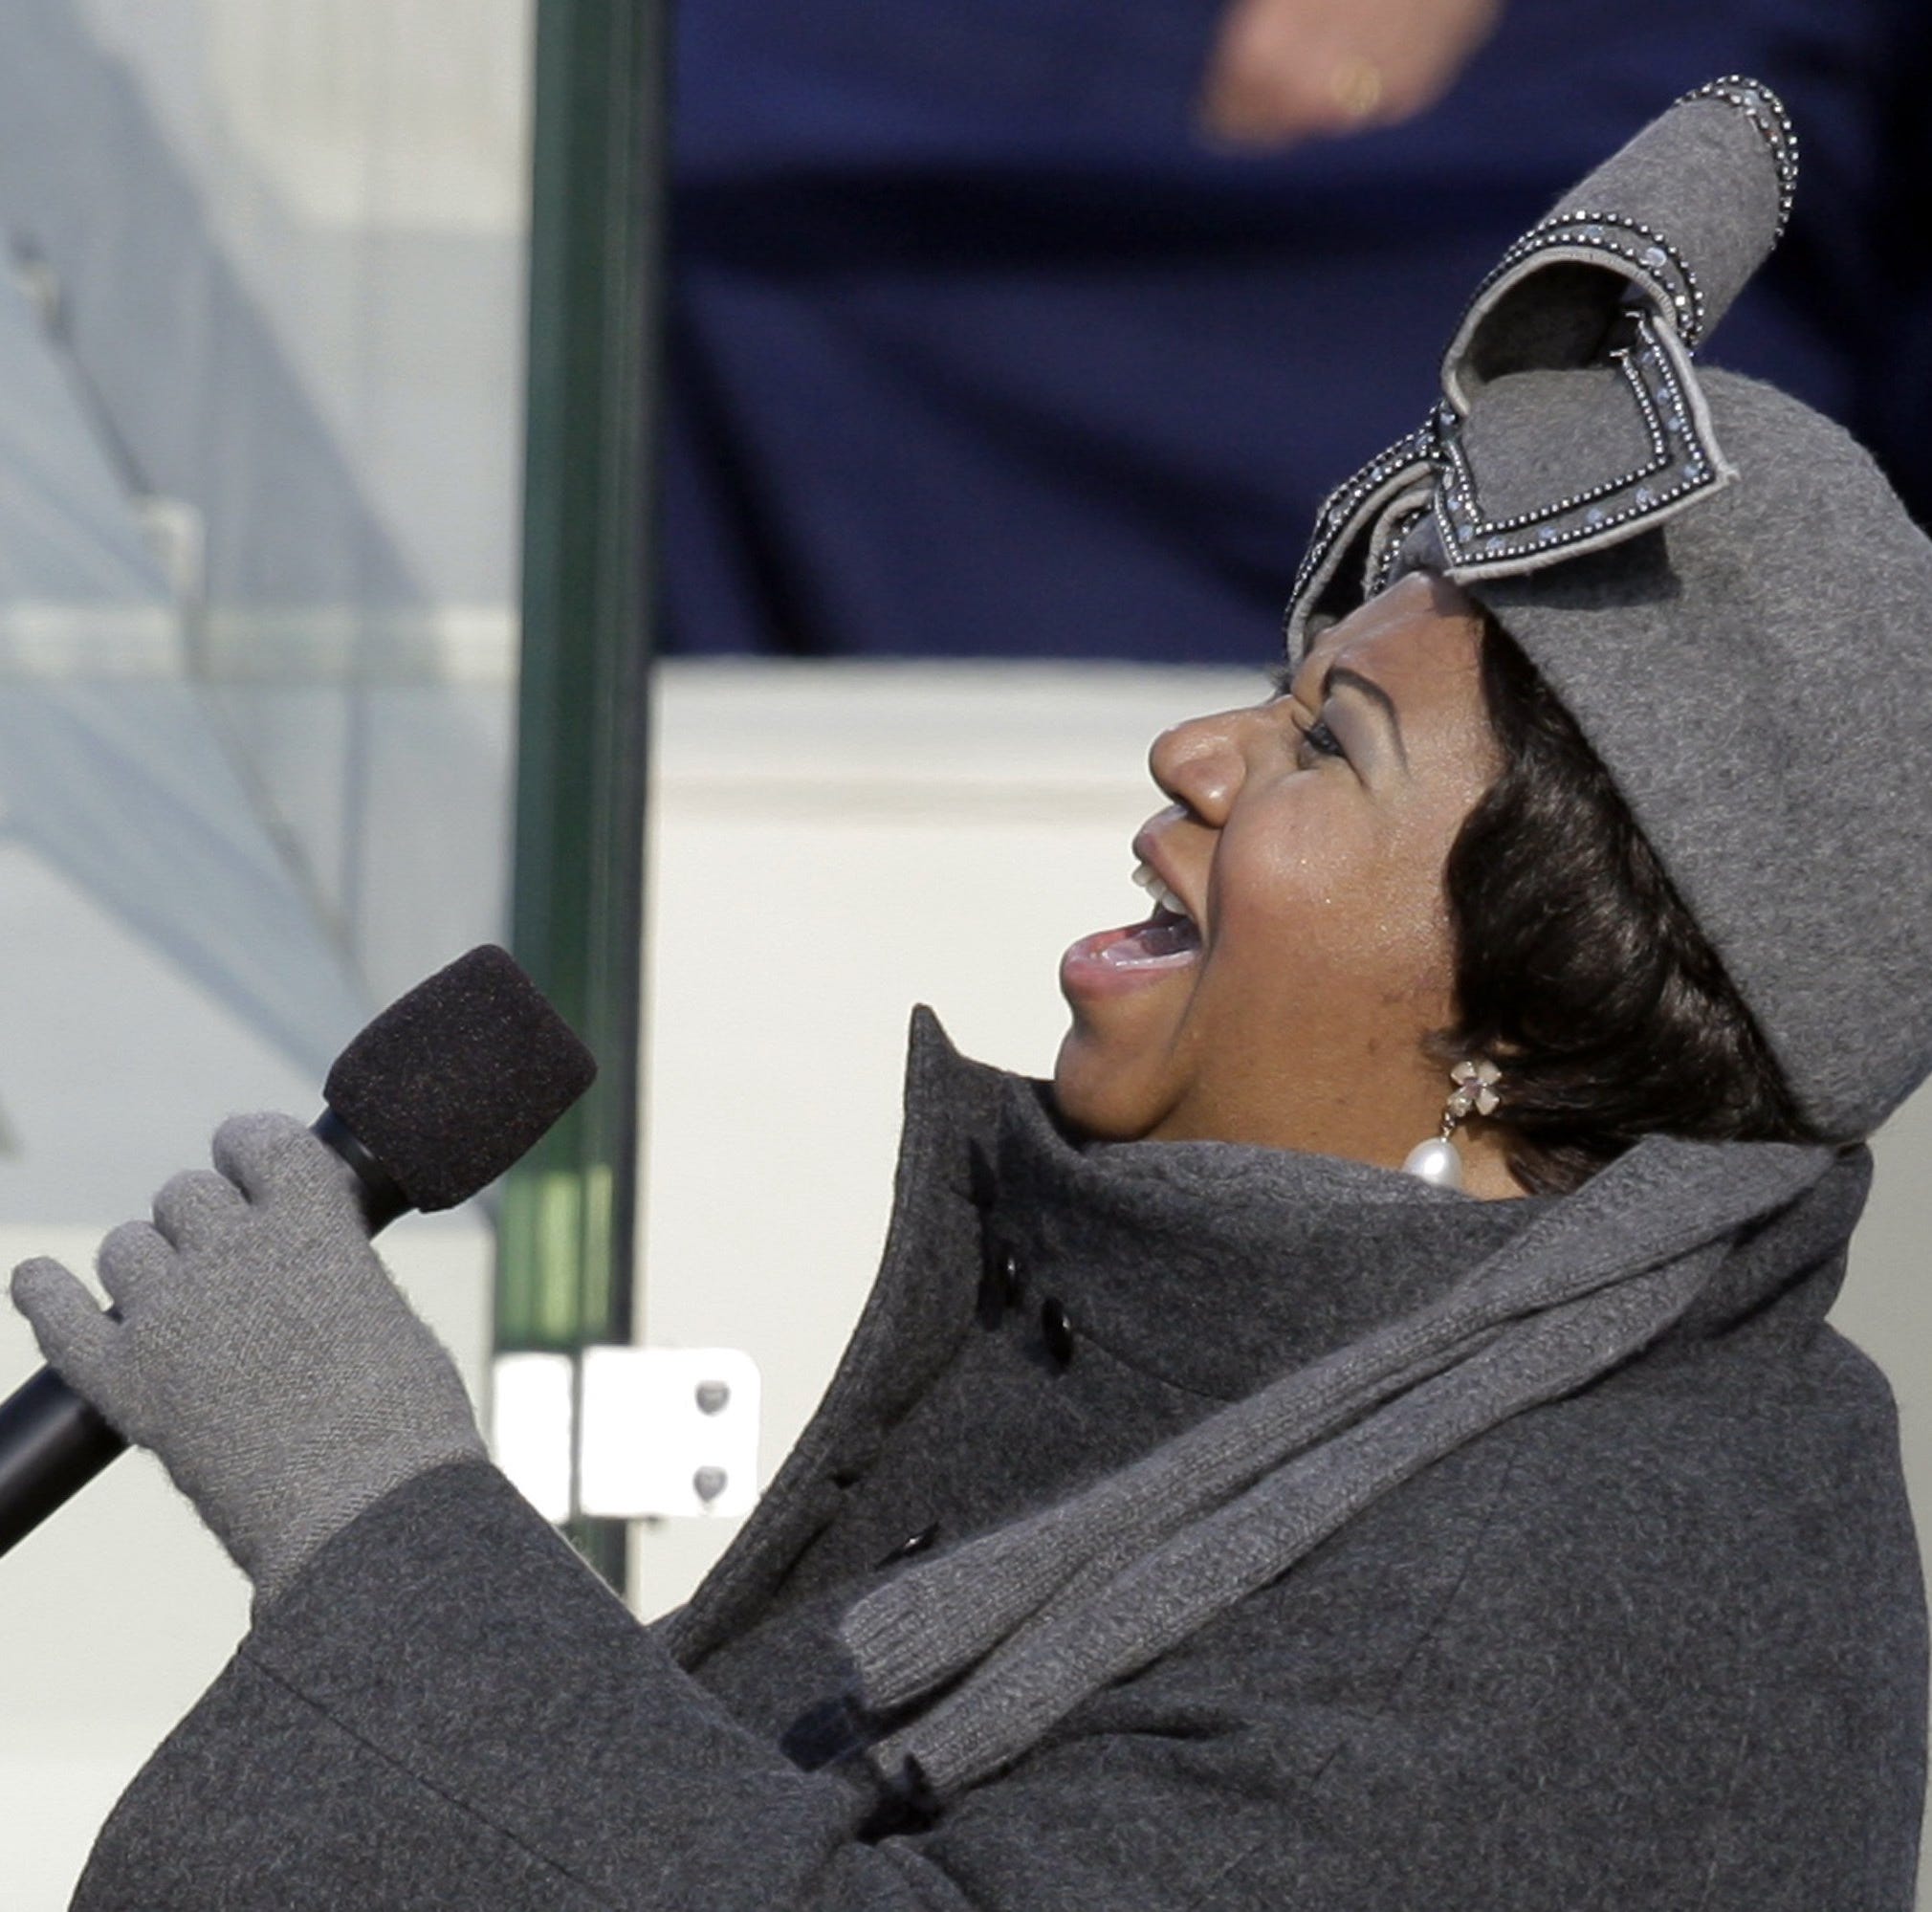 Aretha Franklin performs during the inauguration ceremony at the U.S. Capitol in Washington, Tuesday, Jan. 20, 2009.